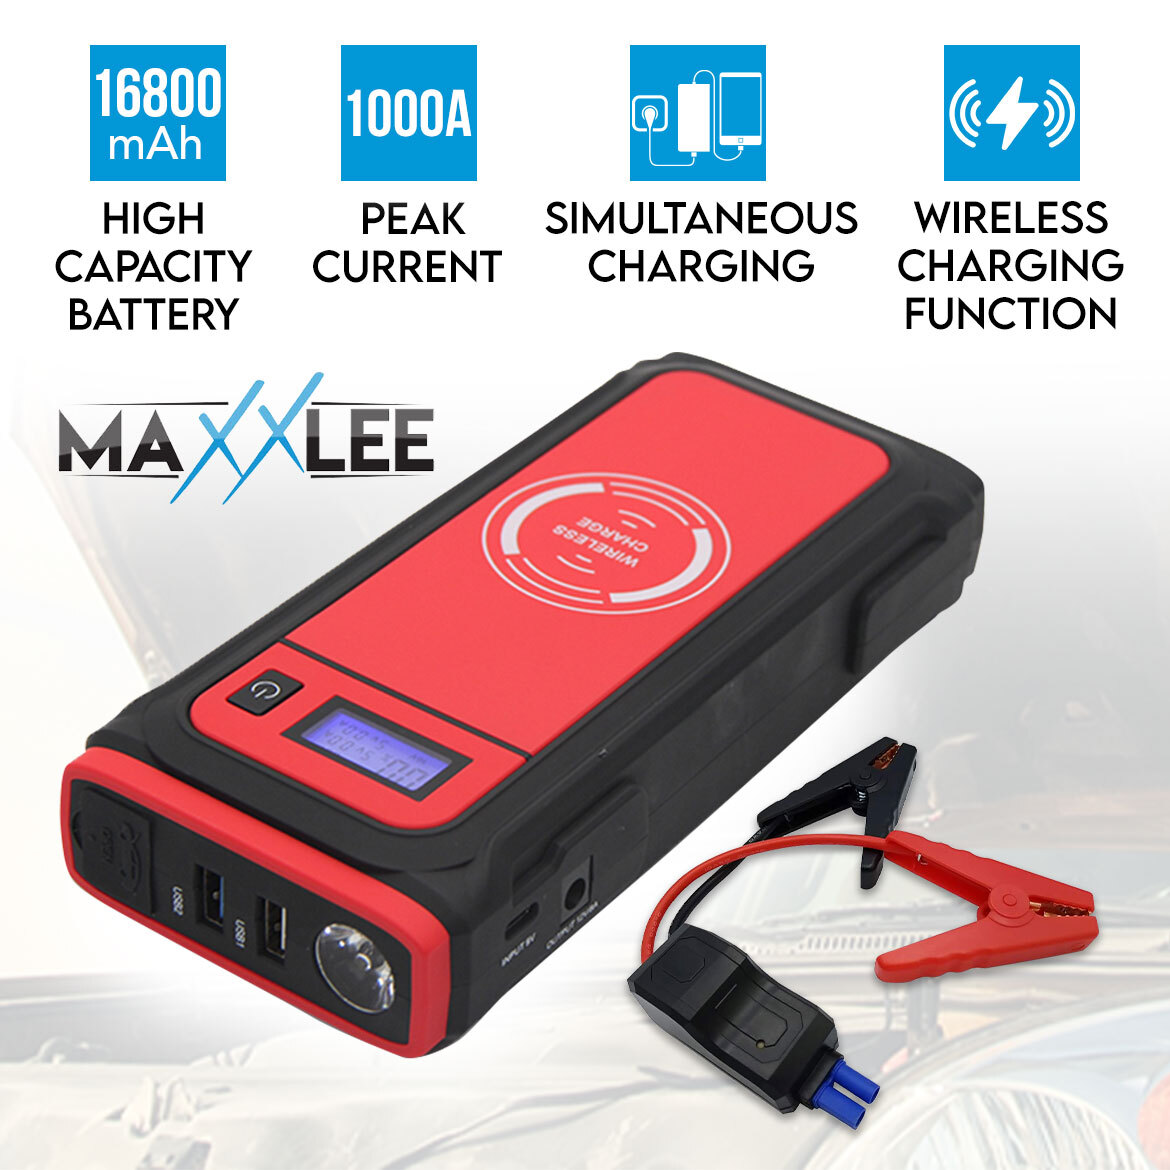 Maxxlee 1500A Car 12V Vehicle Portable Emergency Jump Starter & Battery Charger 20000mAh Wireless Charging Power Bank